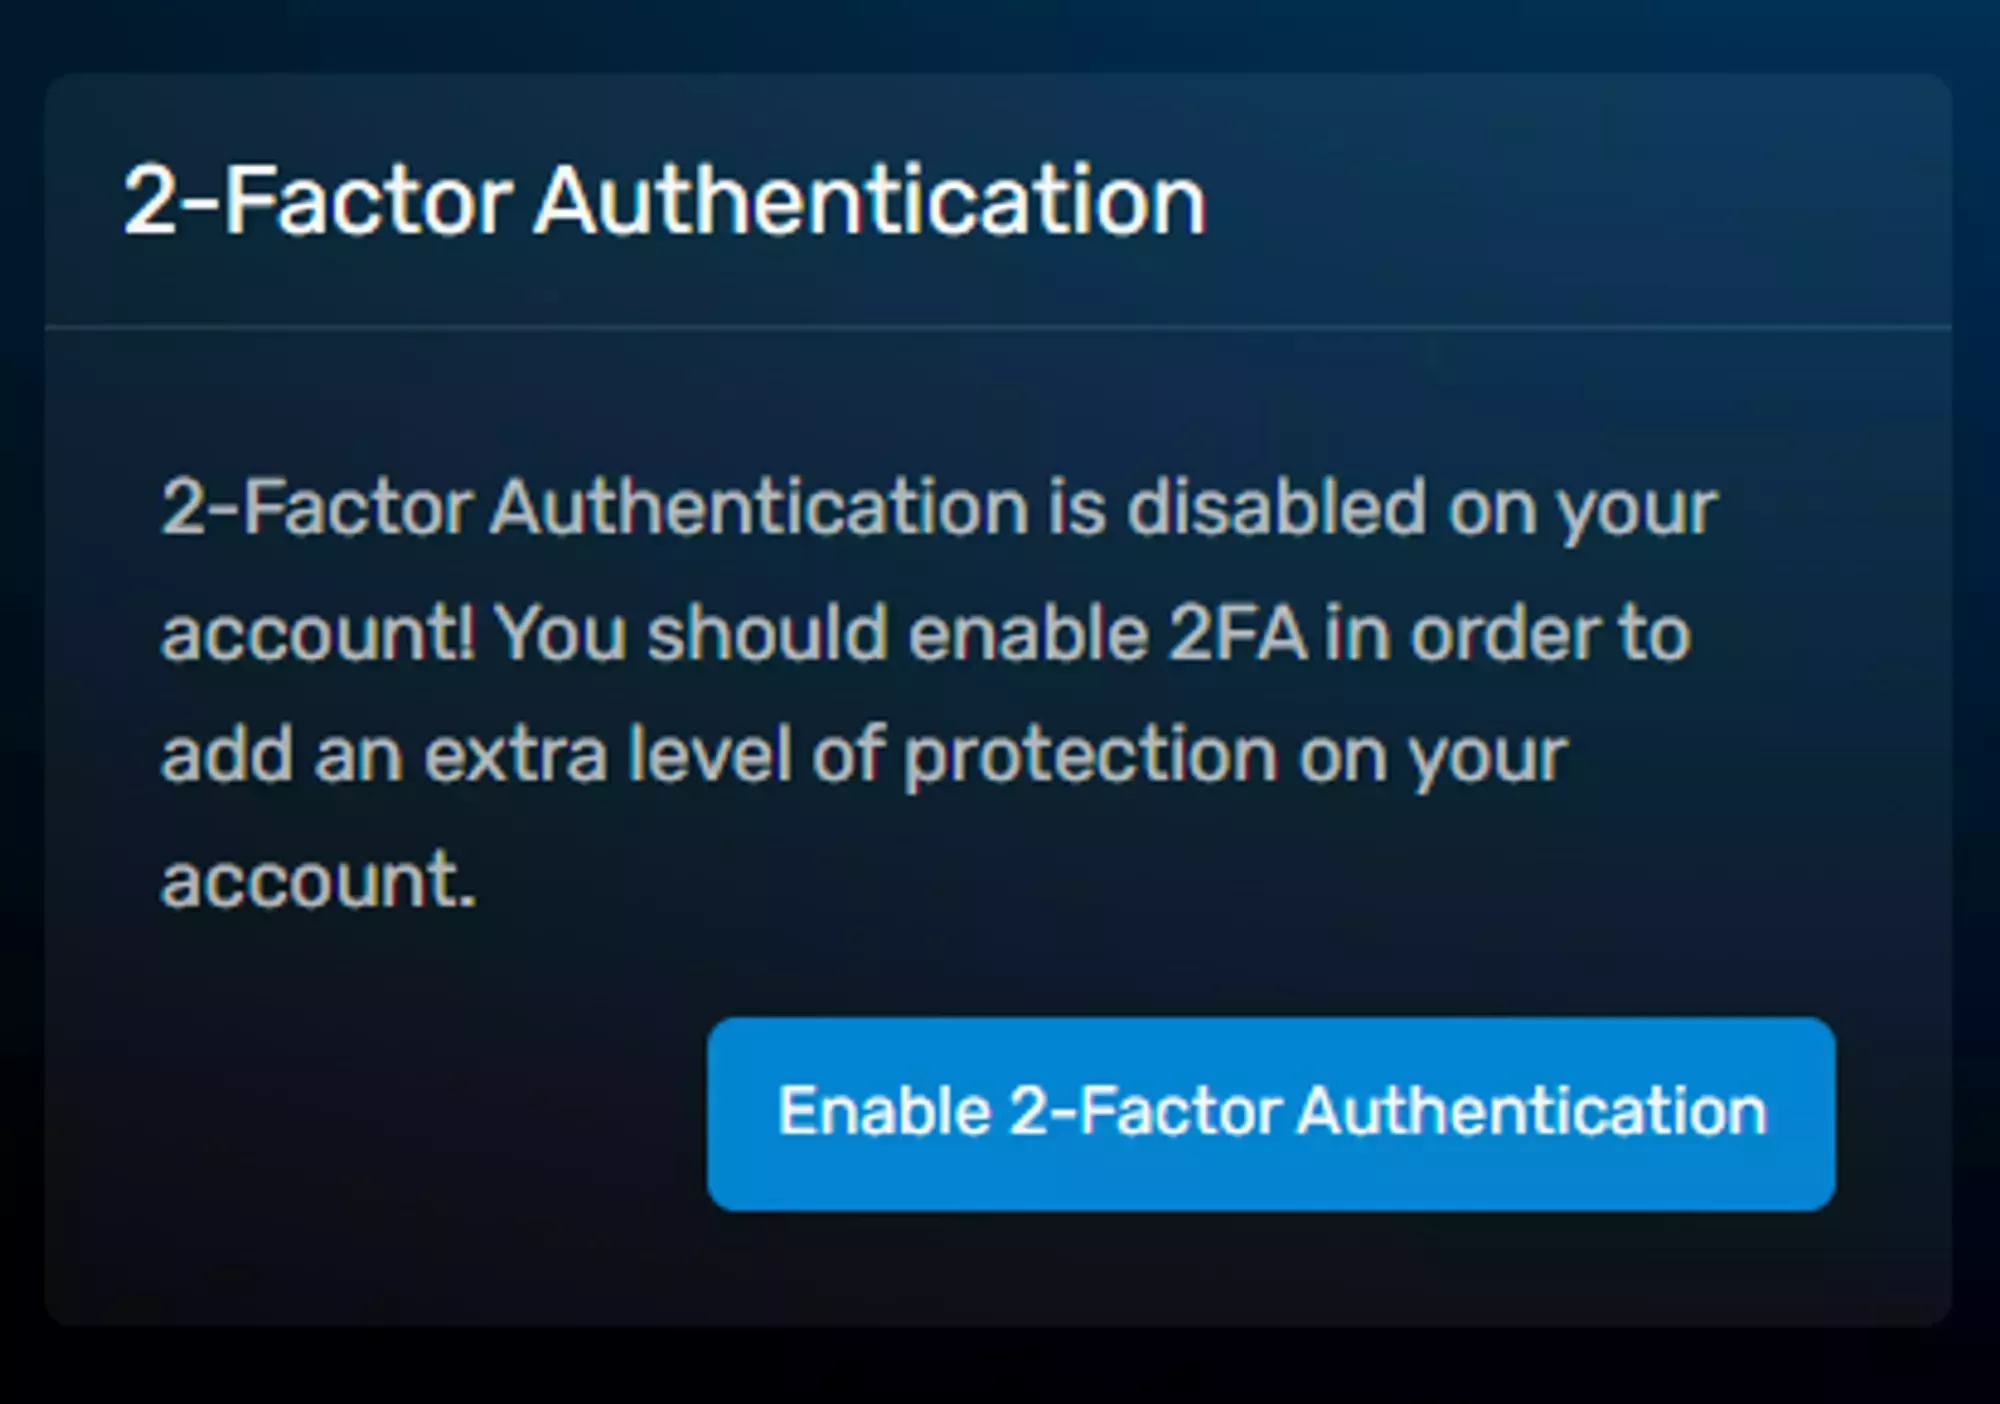 The 2 Factor Authentication Modal, with the Enable &quot;2-Factor Authentication&quot; button on the bottom right corner